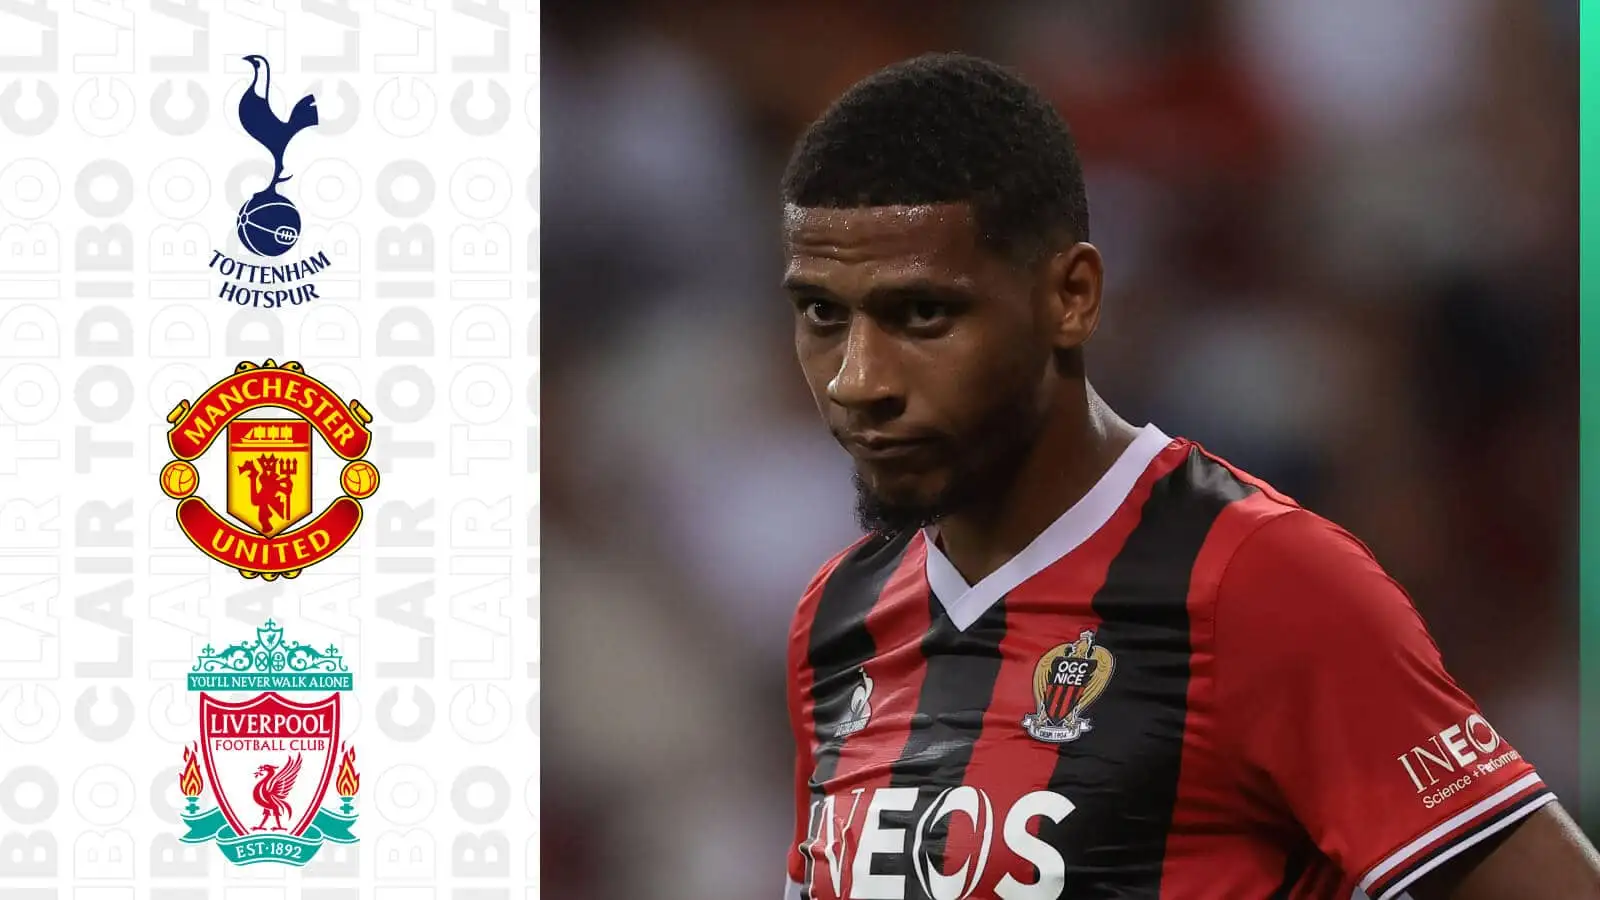 Jean-Clair Todibo next to the Tottenham, Man Utd and Liverpool badges